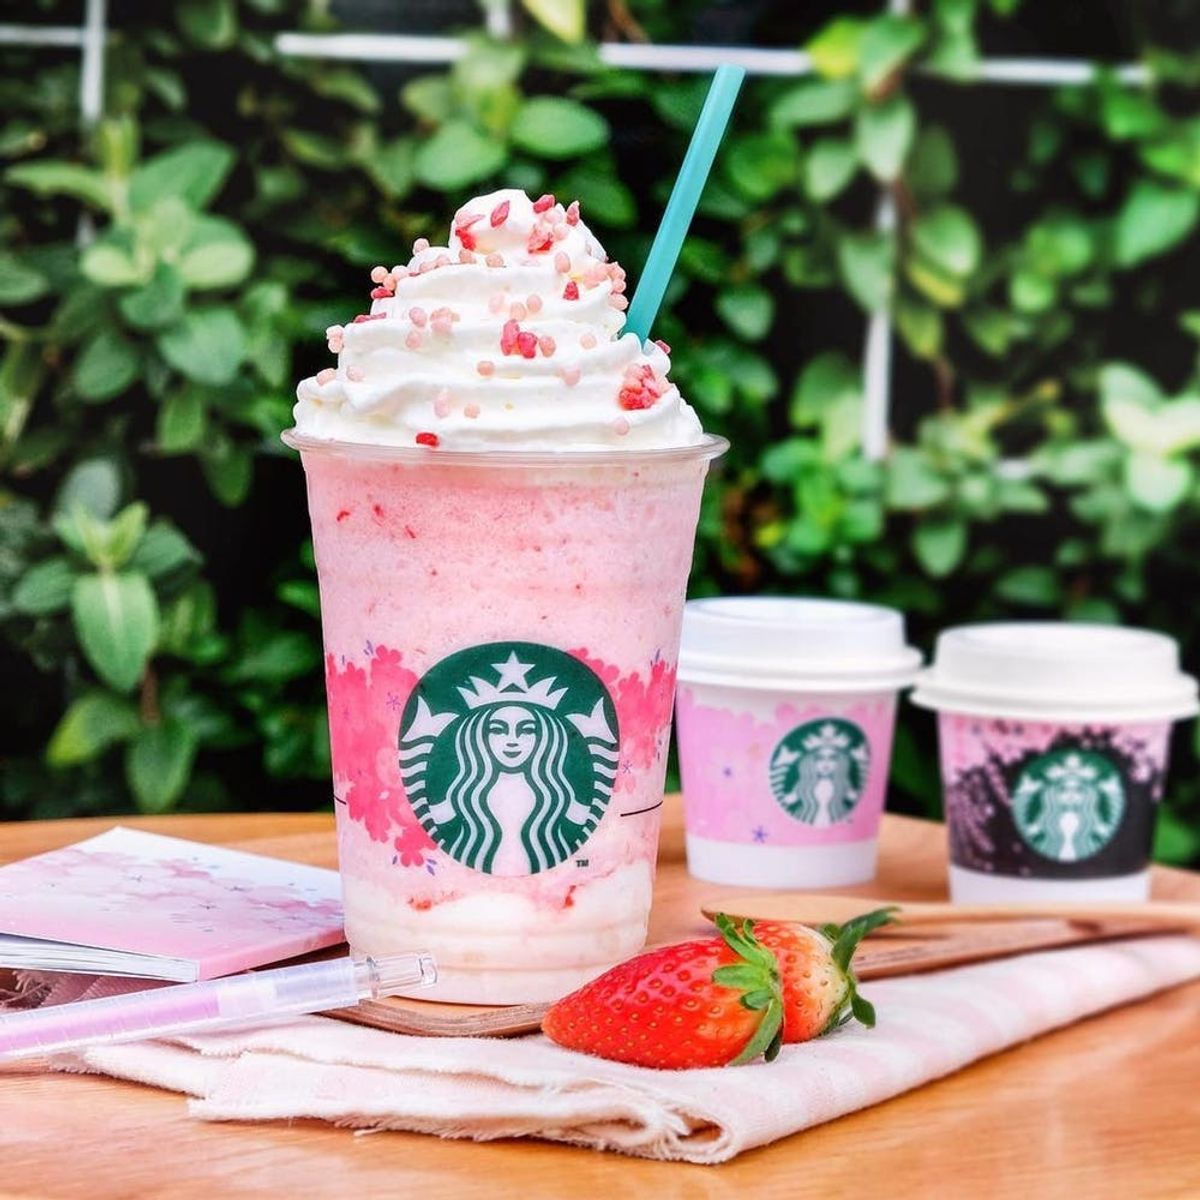 Starbucks Releases ANOTHER Millennial Pink Frapp for Us to Swoon Over